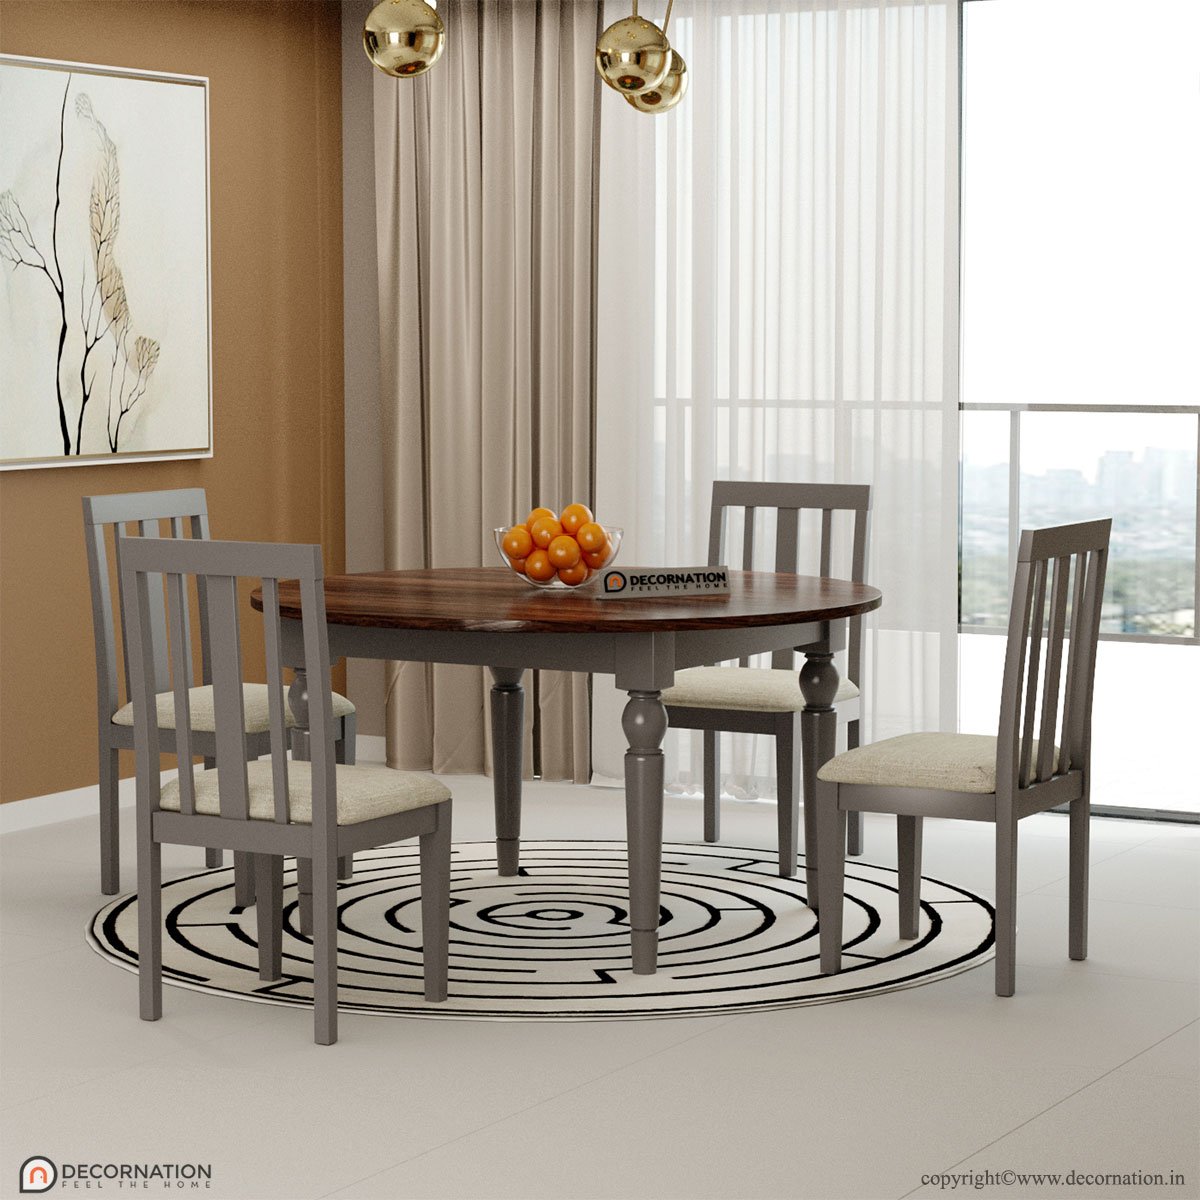 Sierra Dining Table Set – 4 Seater